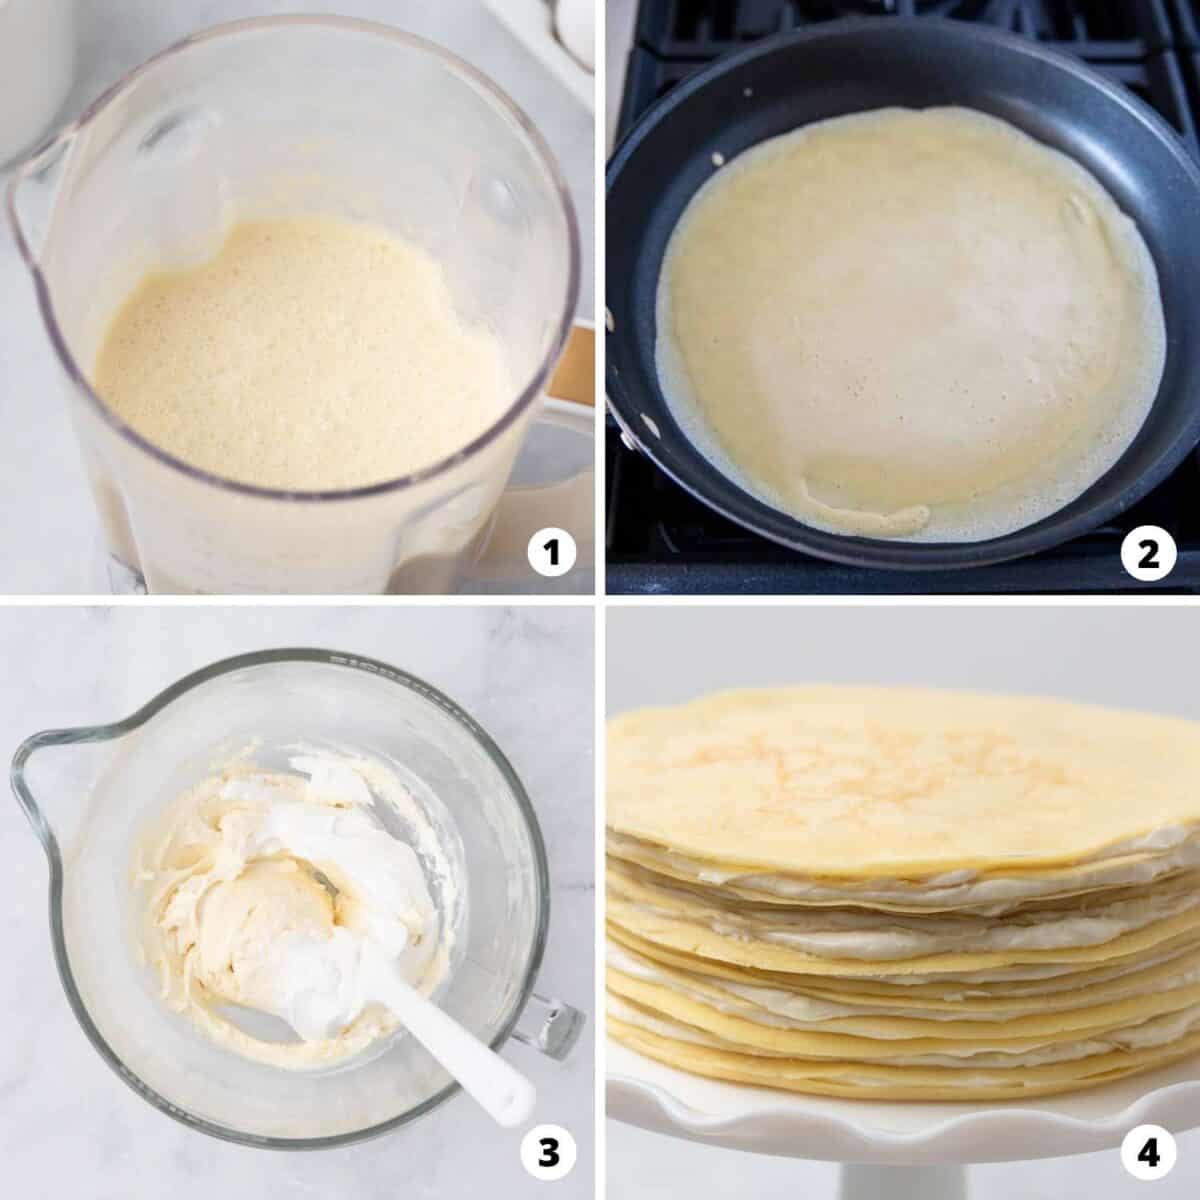 Showing how to make a crepe cake in a 4 step collage.